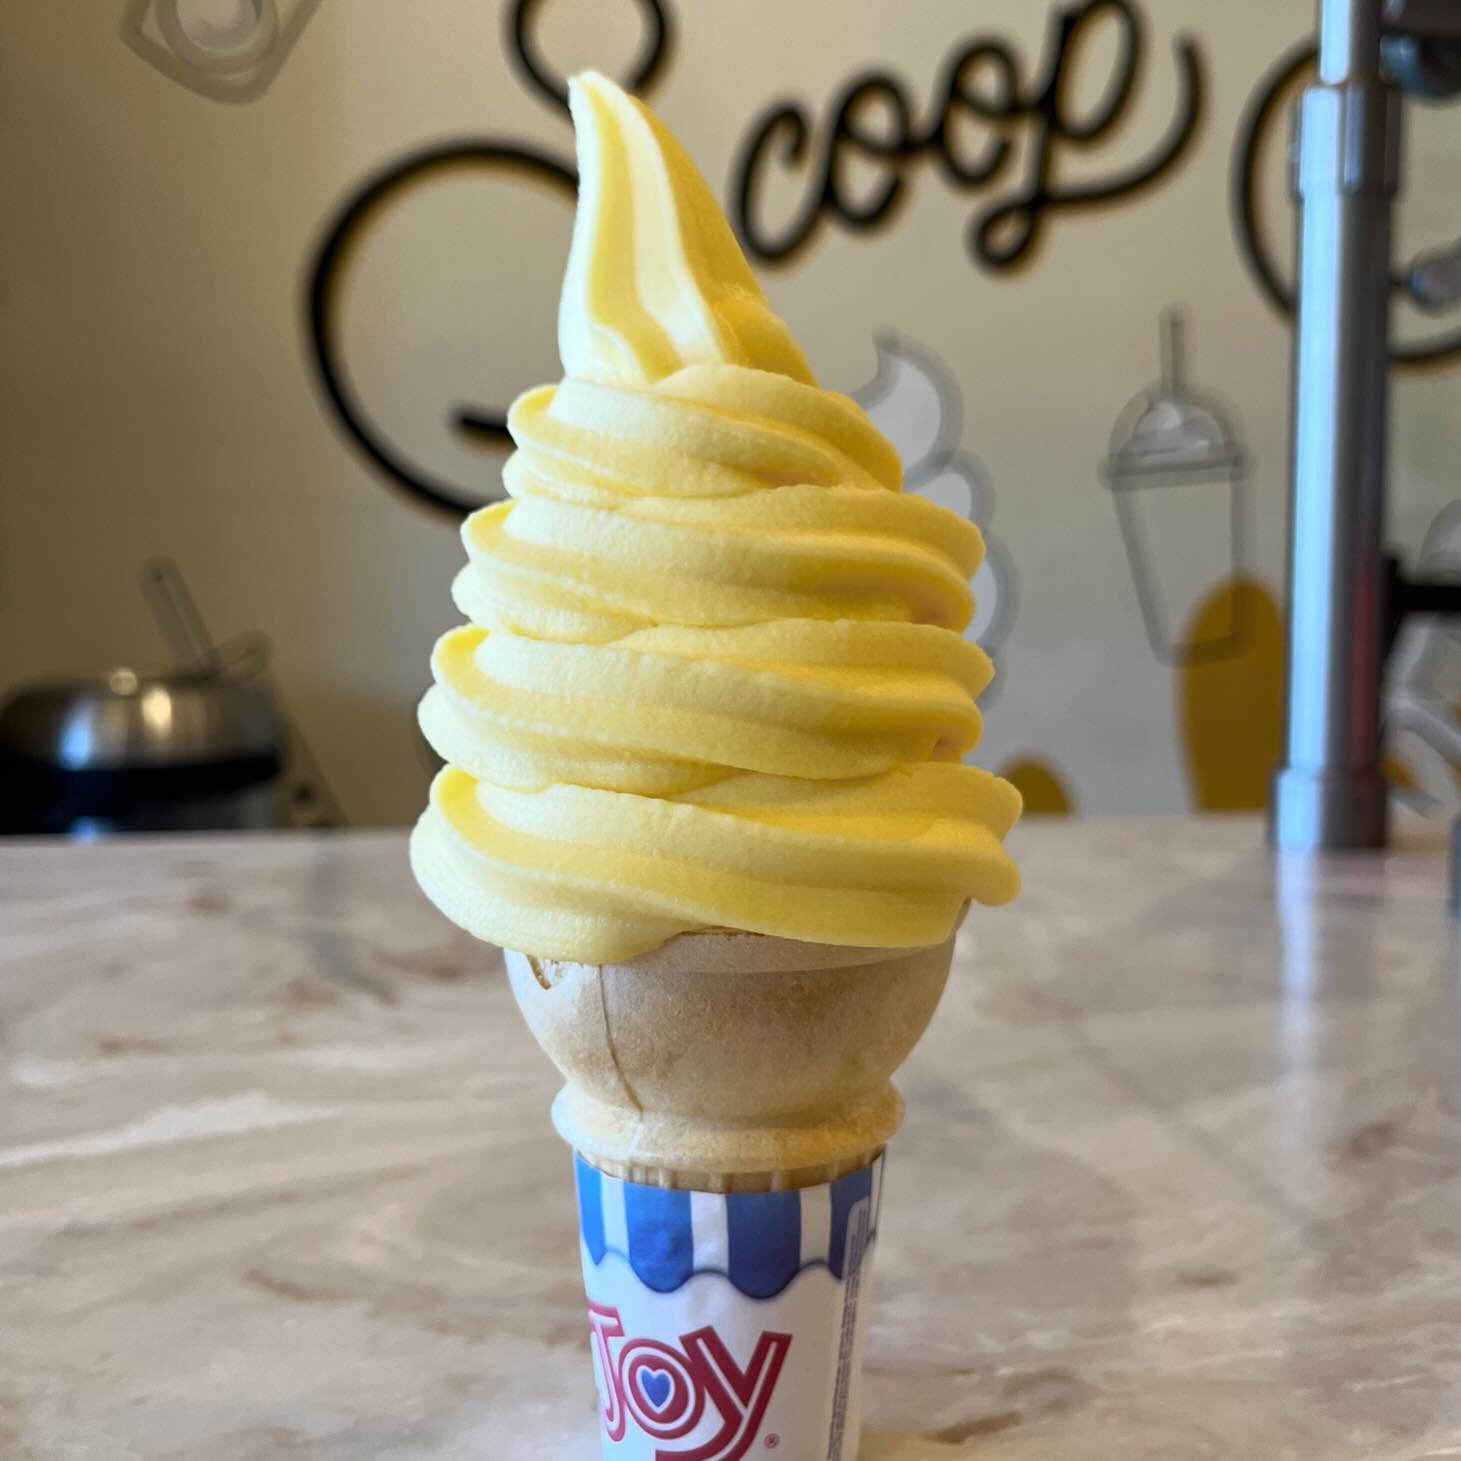 Start the week off with a PINEAPPLE DOLE!
⠀⠀⠀⠀⠀⠀⠀⠀⠀⠀⠀⠀⠀⠀⠀⠀⠀⠀
Come on by!
🌷Sun: Noon-9pm
🌷Mon-Thur: 1pm-9pm
🌷Fri: 1pm-10pm
🌷Sat: Noon-10pm
Or get it delivered with DoorDash! 

⠀⠀⠀⠀⠀⠀⠀⠀⠀⠀⠀⠀⠀⠀⠀⠀⠀⠀ 
⠀⠀⠀⠀⠀⠀⠀⠀⠀⠀⠀⠀⠀⠀⠀⠀⠀⠀
⠀⠀⠀⠀⠀⠀⠀⠀⠀⠀⠀⠀⠀⠀⠀⠀⠀⠀
⠀⠀⠀⠀⠀⠀⠀⠀⠀⠀⠀⠀⠀